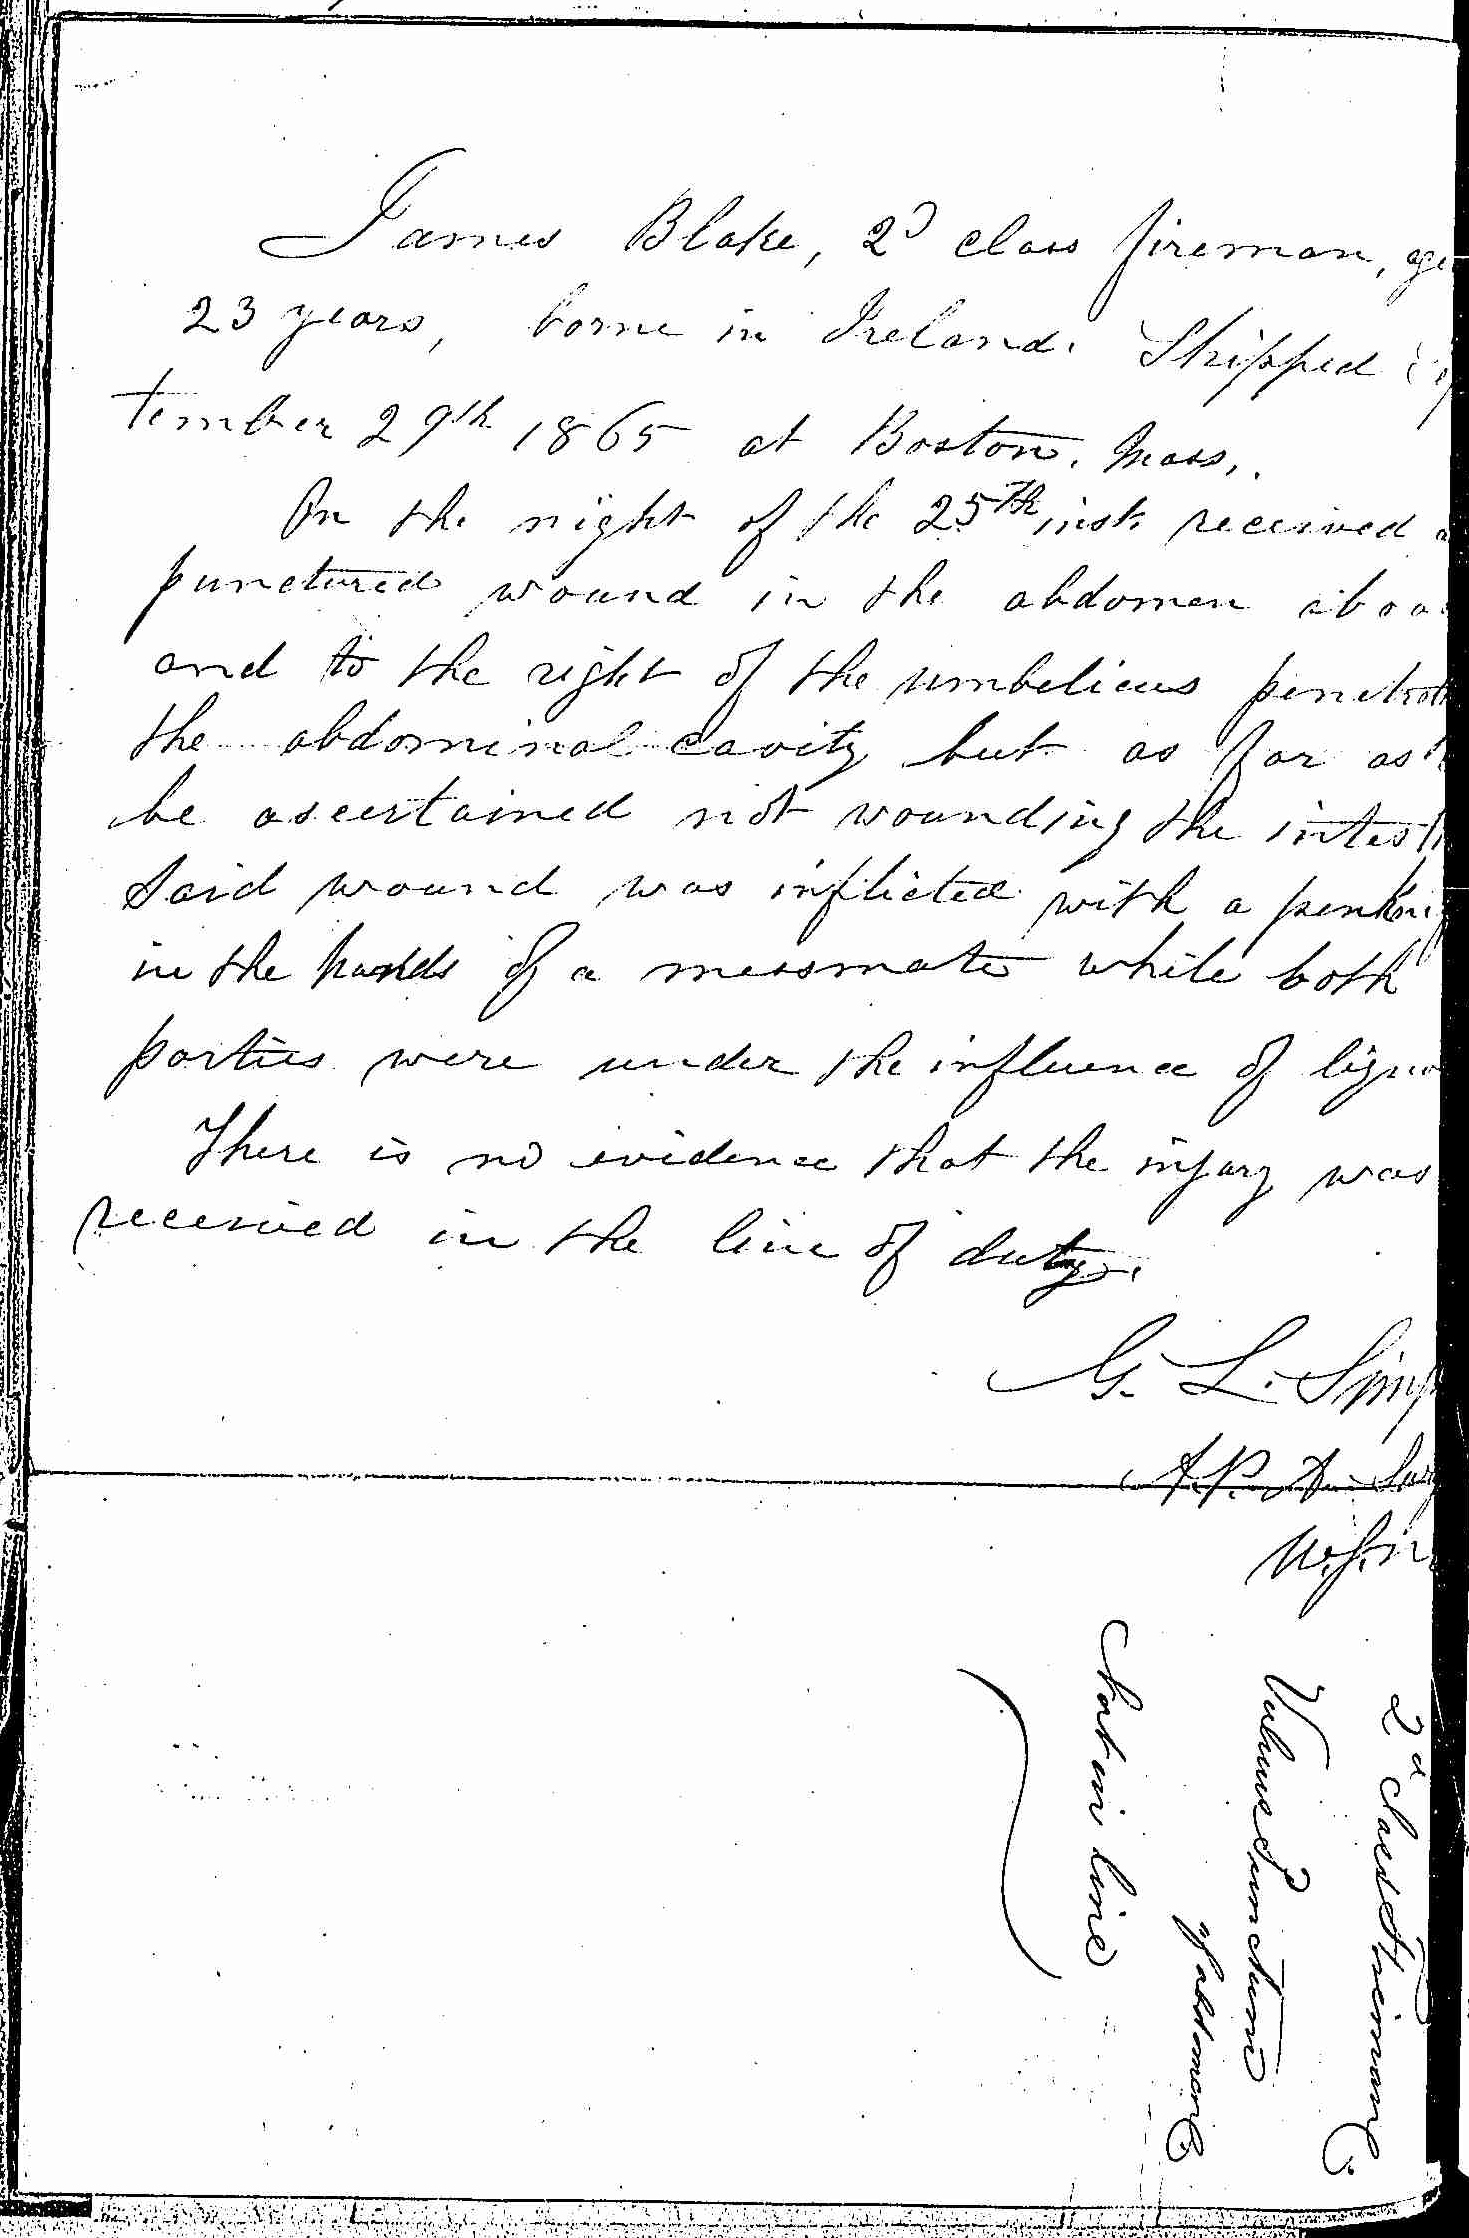 Entry for James Blake (page 2 of 2) in the log Hospital Tickets and Case Papers - Naval Hospital - Washington, D.C. - 1866-68